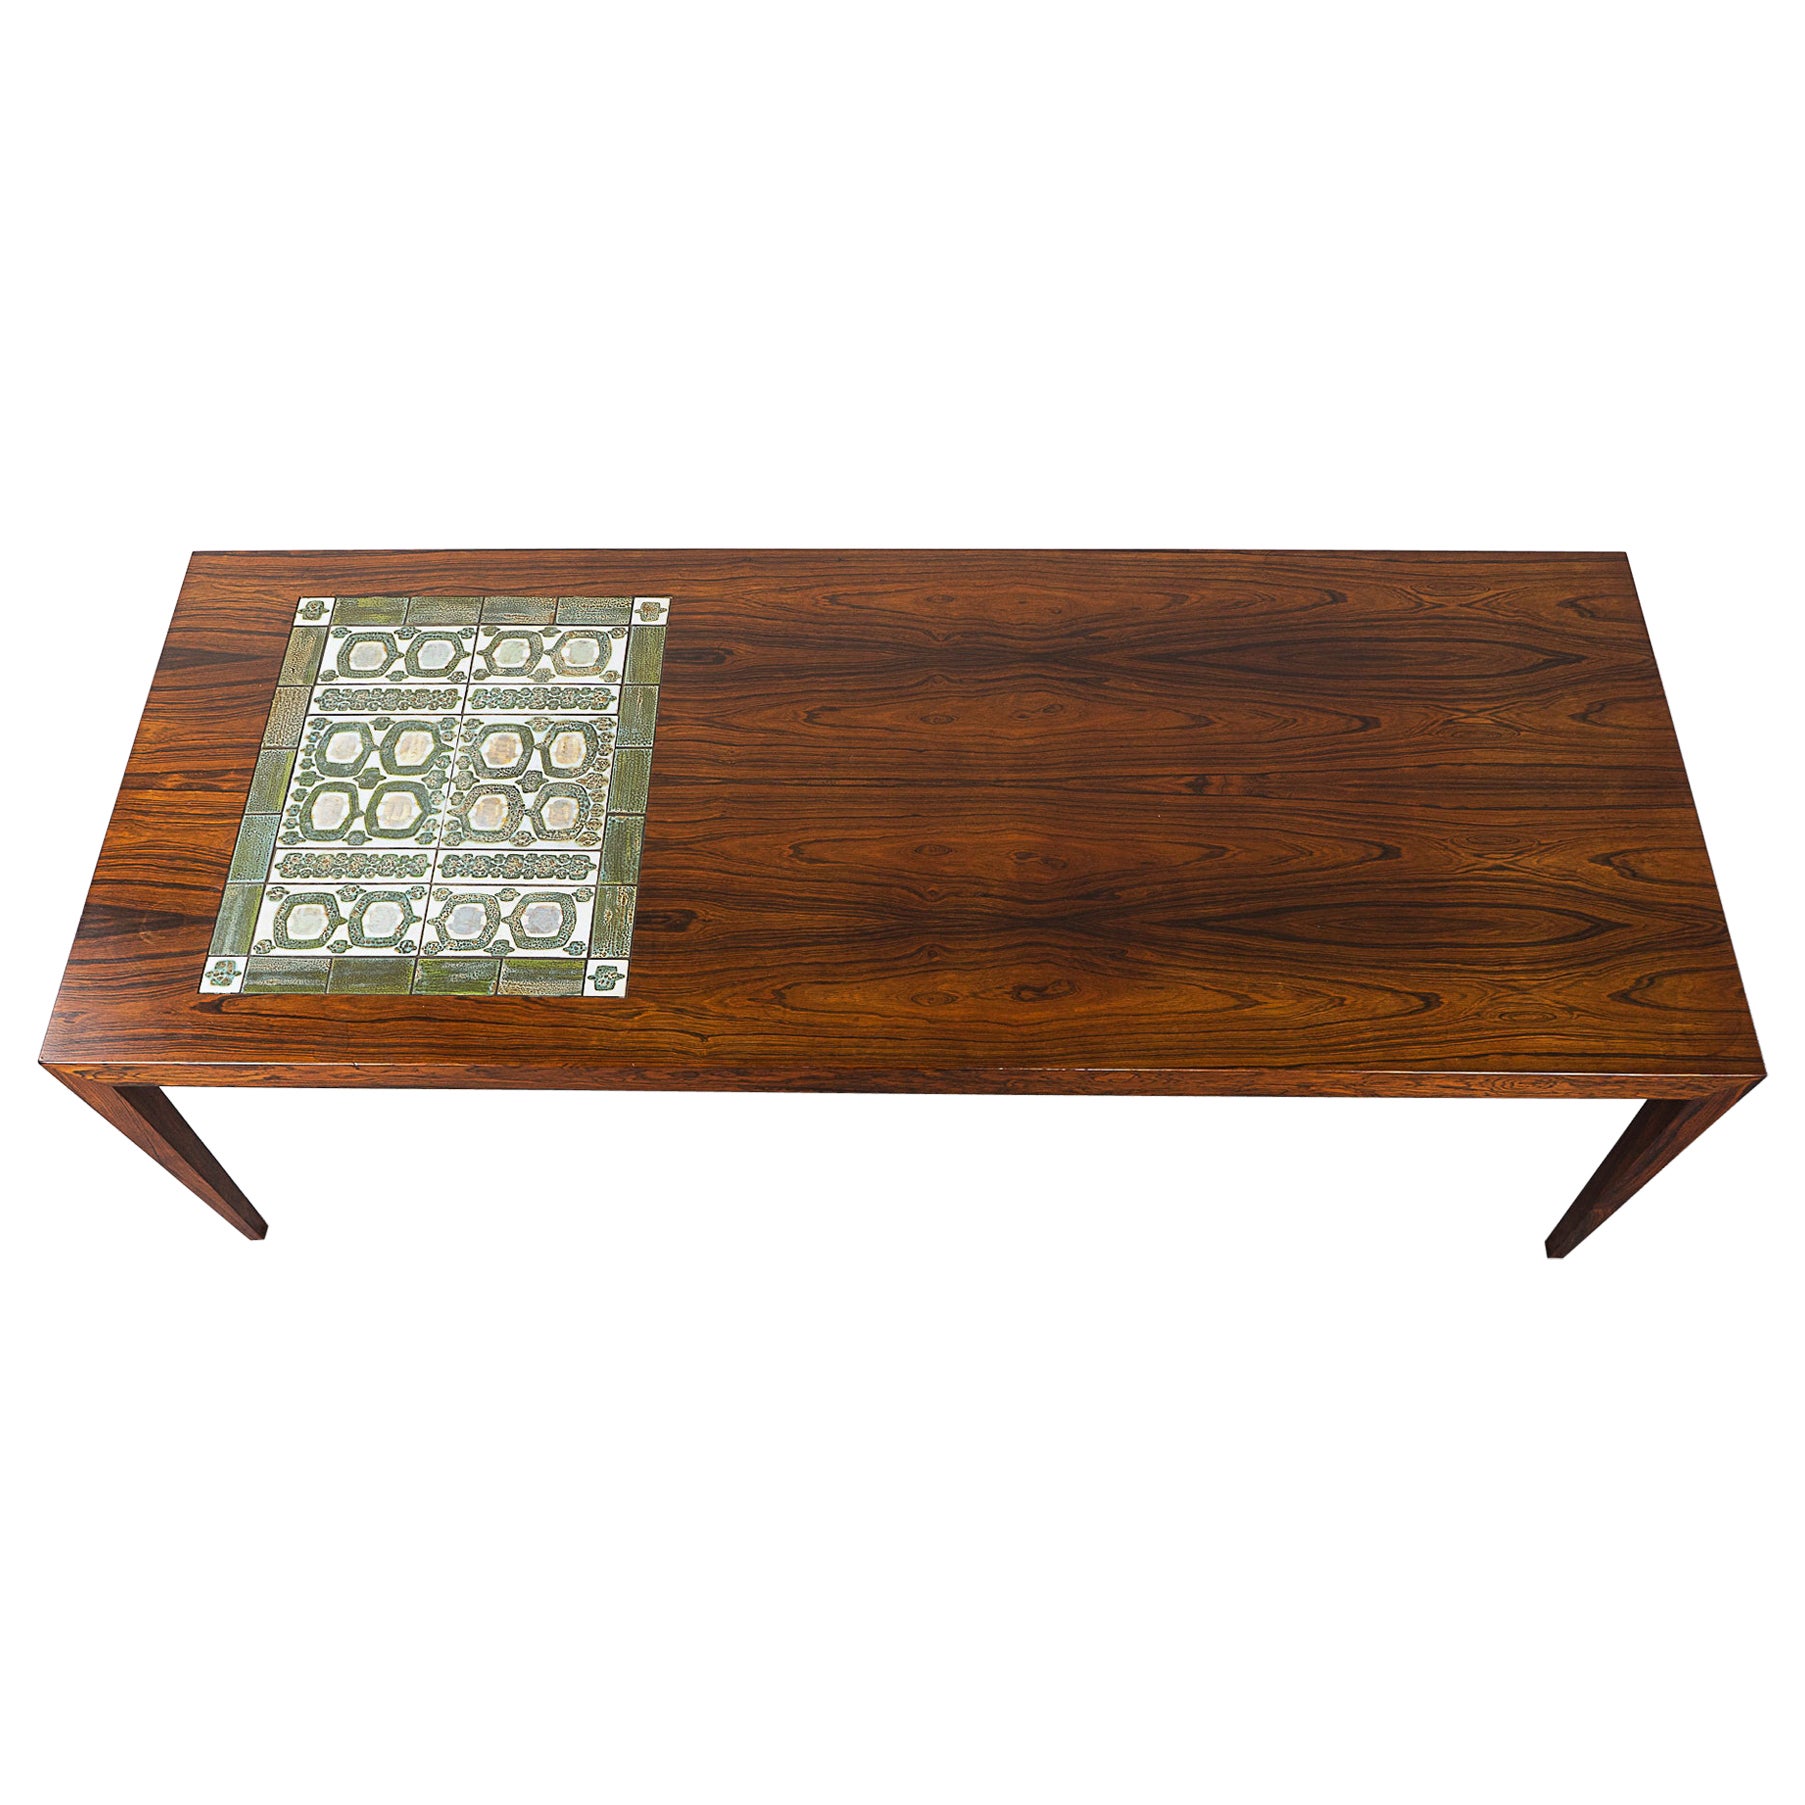 Danish Modern Rosewood & Tile Coffee Table by Severin Hansen For Sale